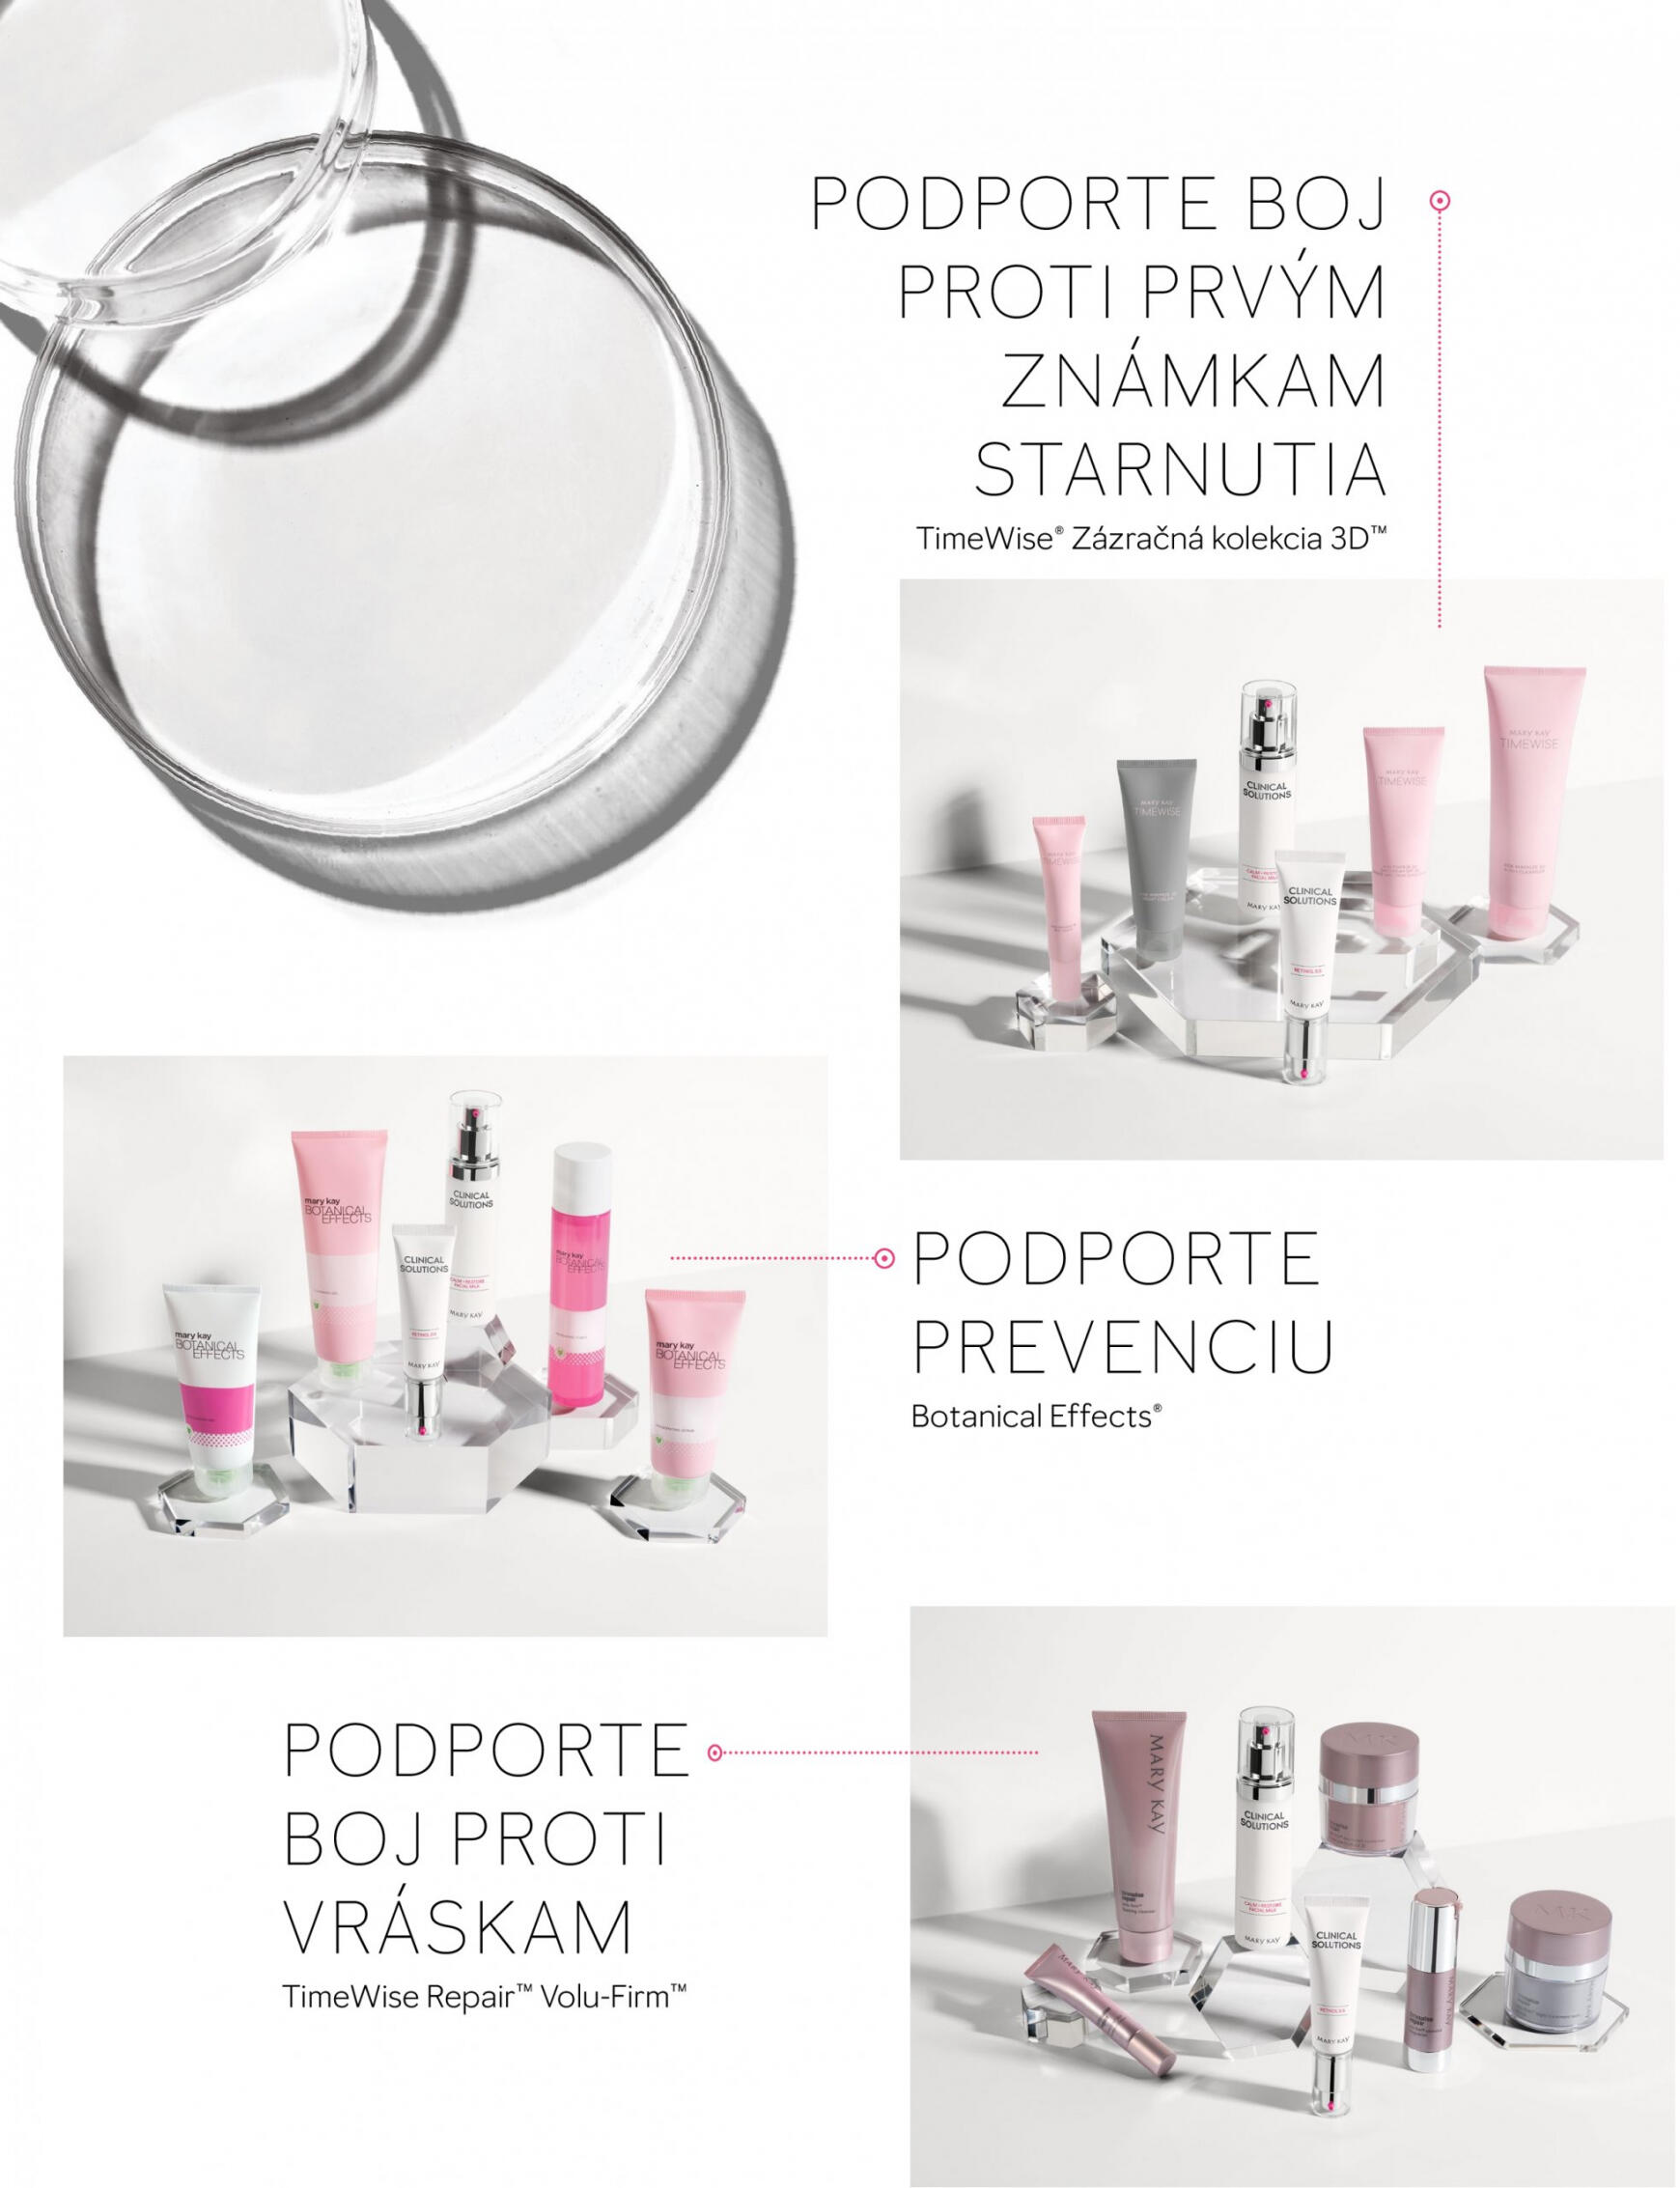 mary-kay - Mary Kay Clinical Solutions® - page: 33